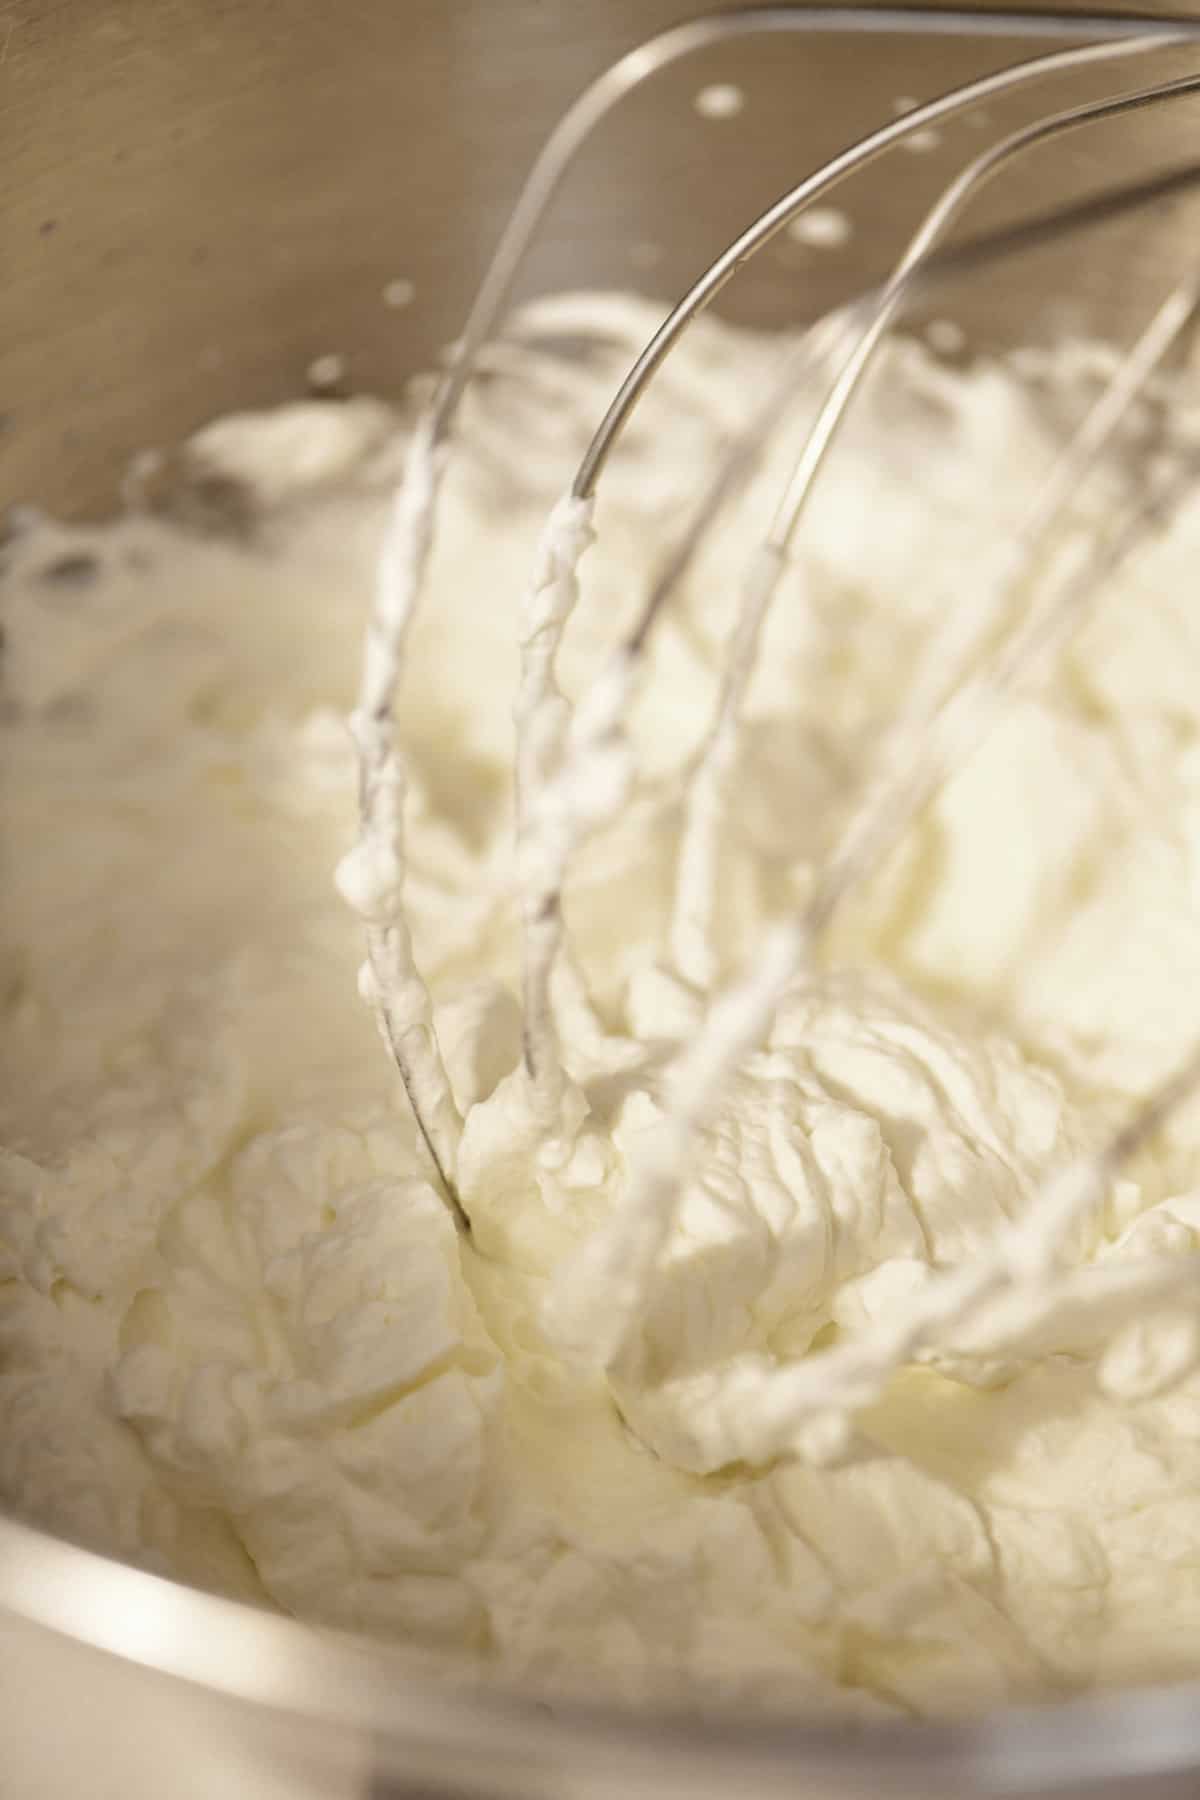 Whipped cream in bowl.